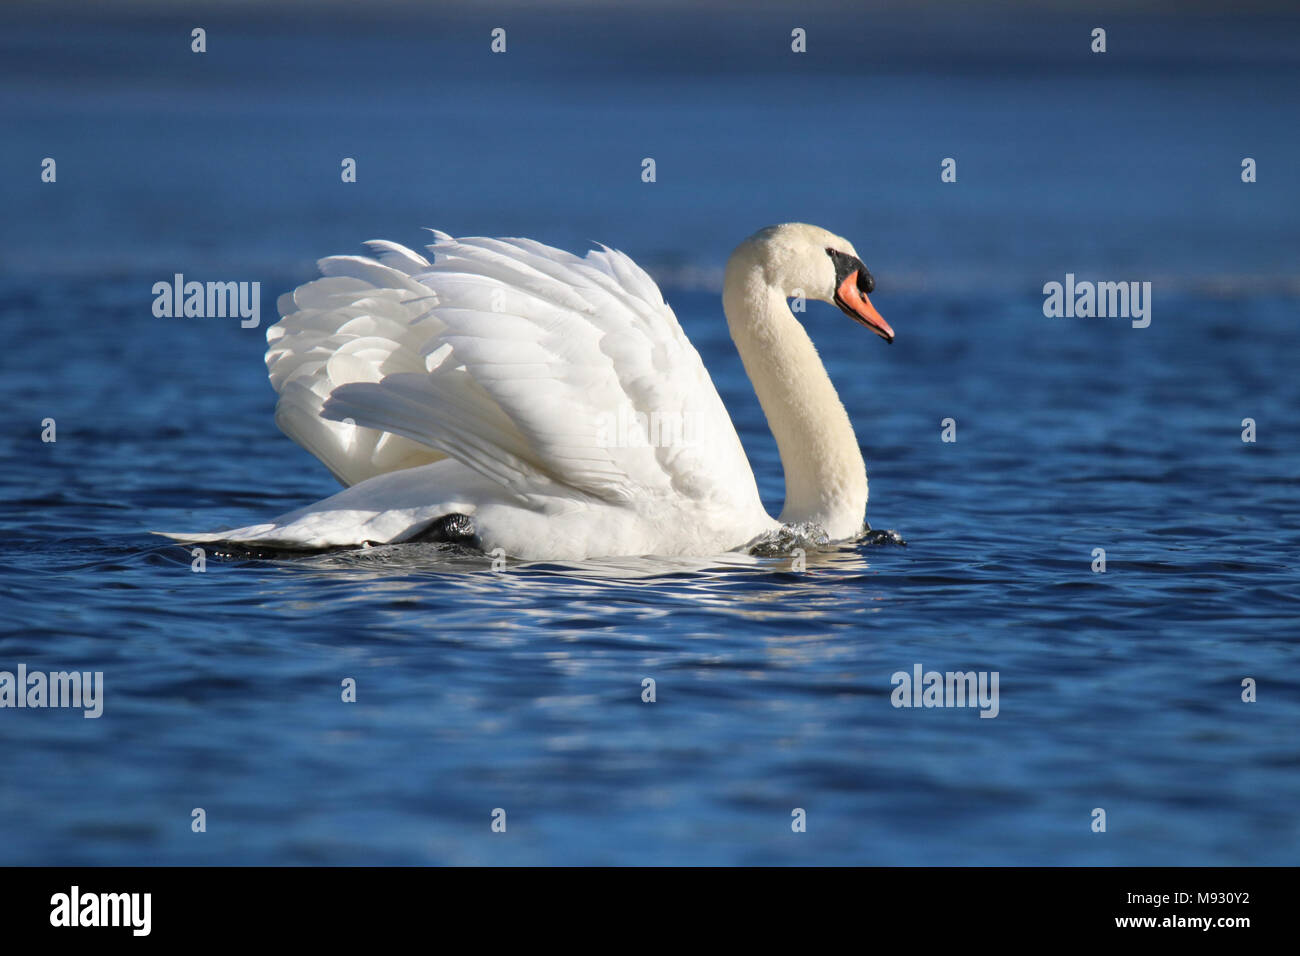 A mute swan Cygnus olor swimming on blue water on a winter day Stock Photo